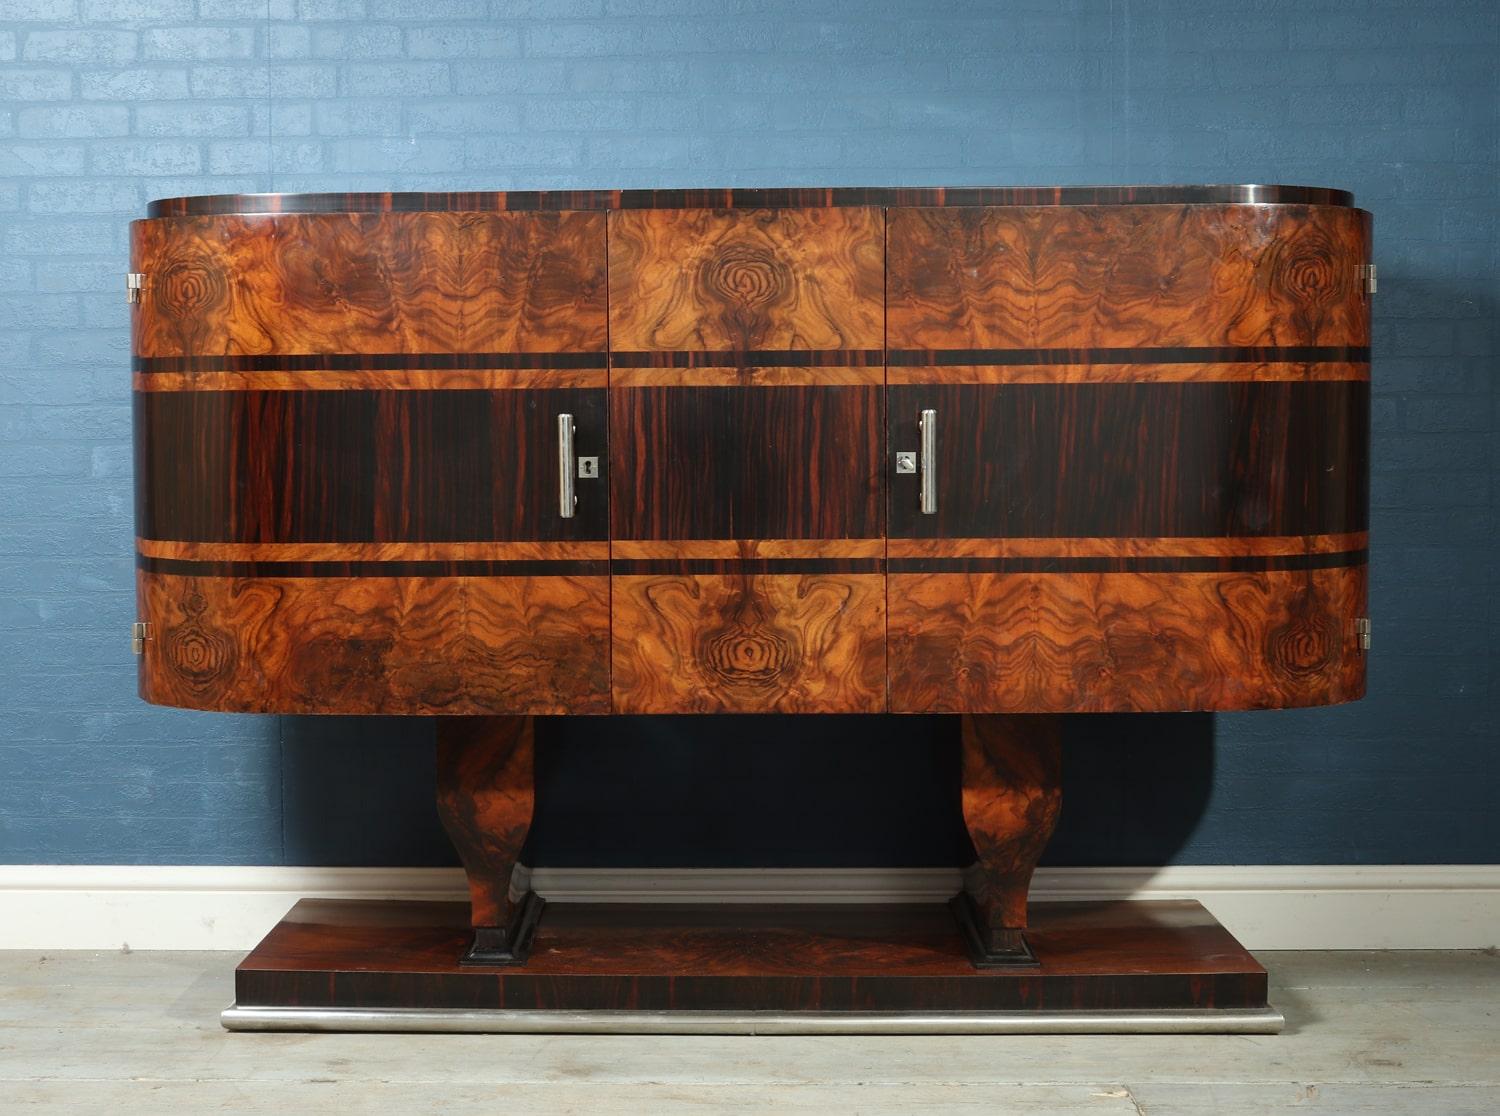 Art Deco sideboard in walnut and Macassar, circa 1930
A stunning cigar end art deco sideboard produced in Italy in the 1930s in walnut with Macassar cross banding and inlay, chromed hard wear, locks working with keys fully restored and polished and